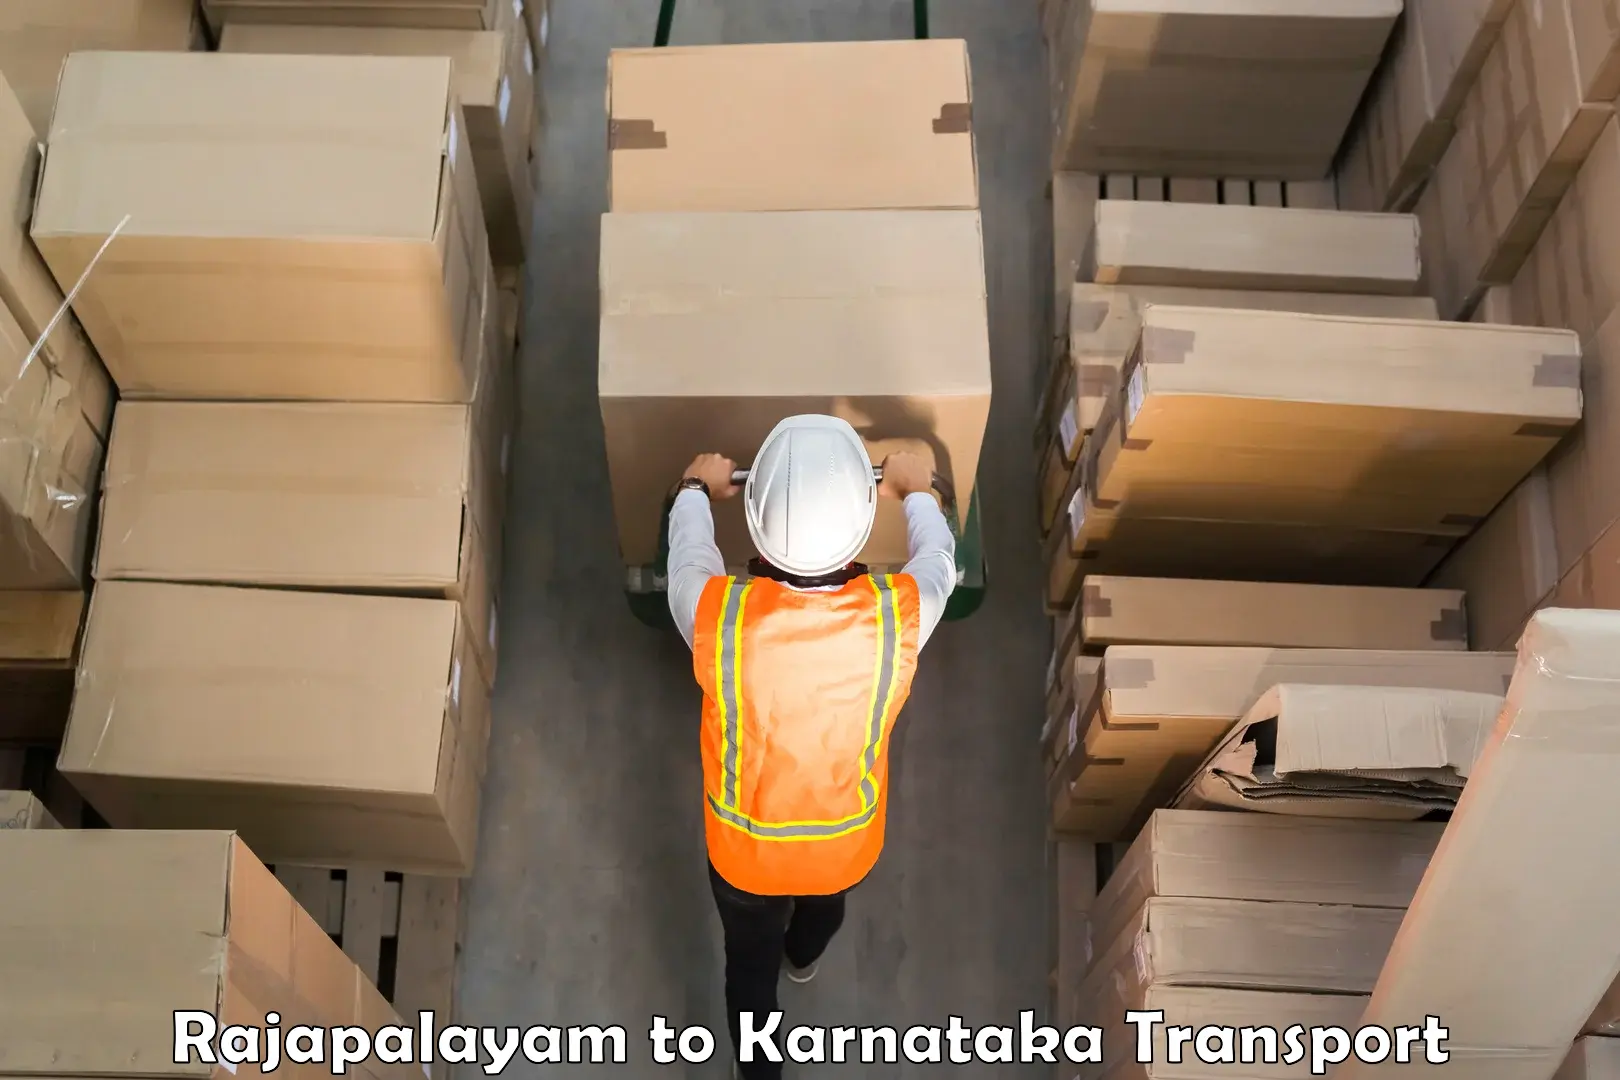 Container transport service Rajapalayam to Chikkamagalur